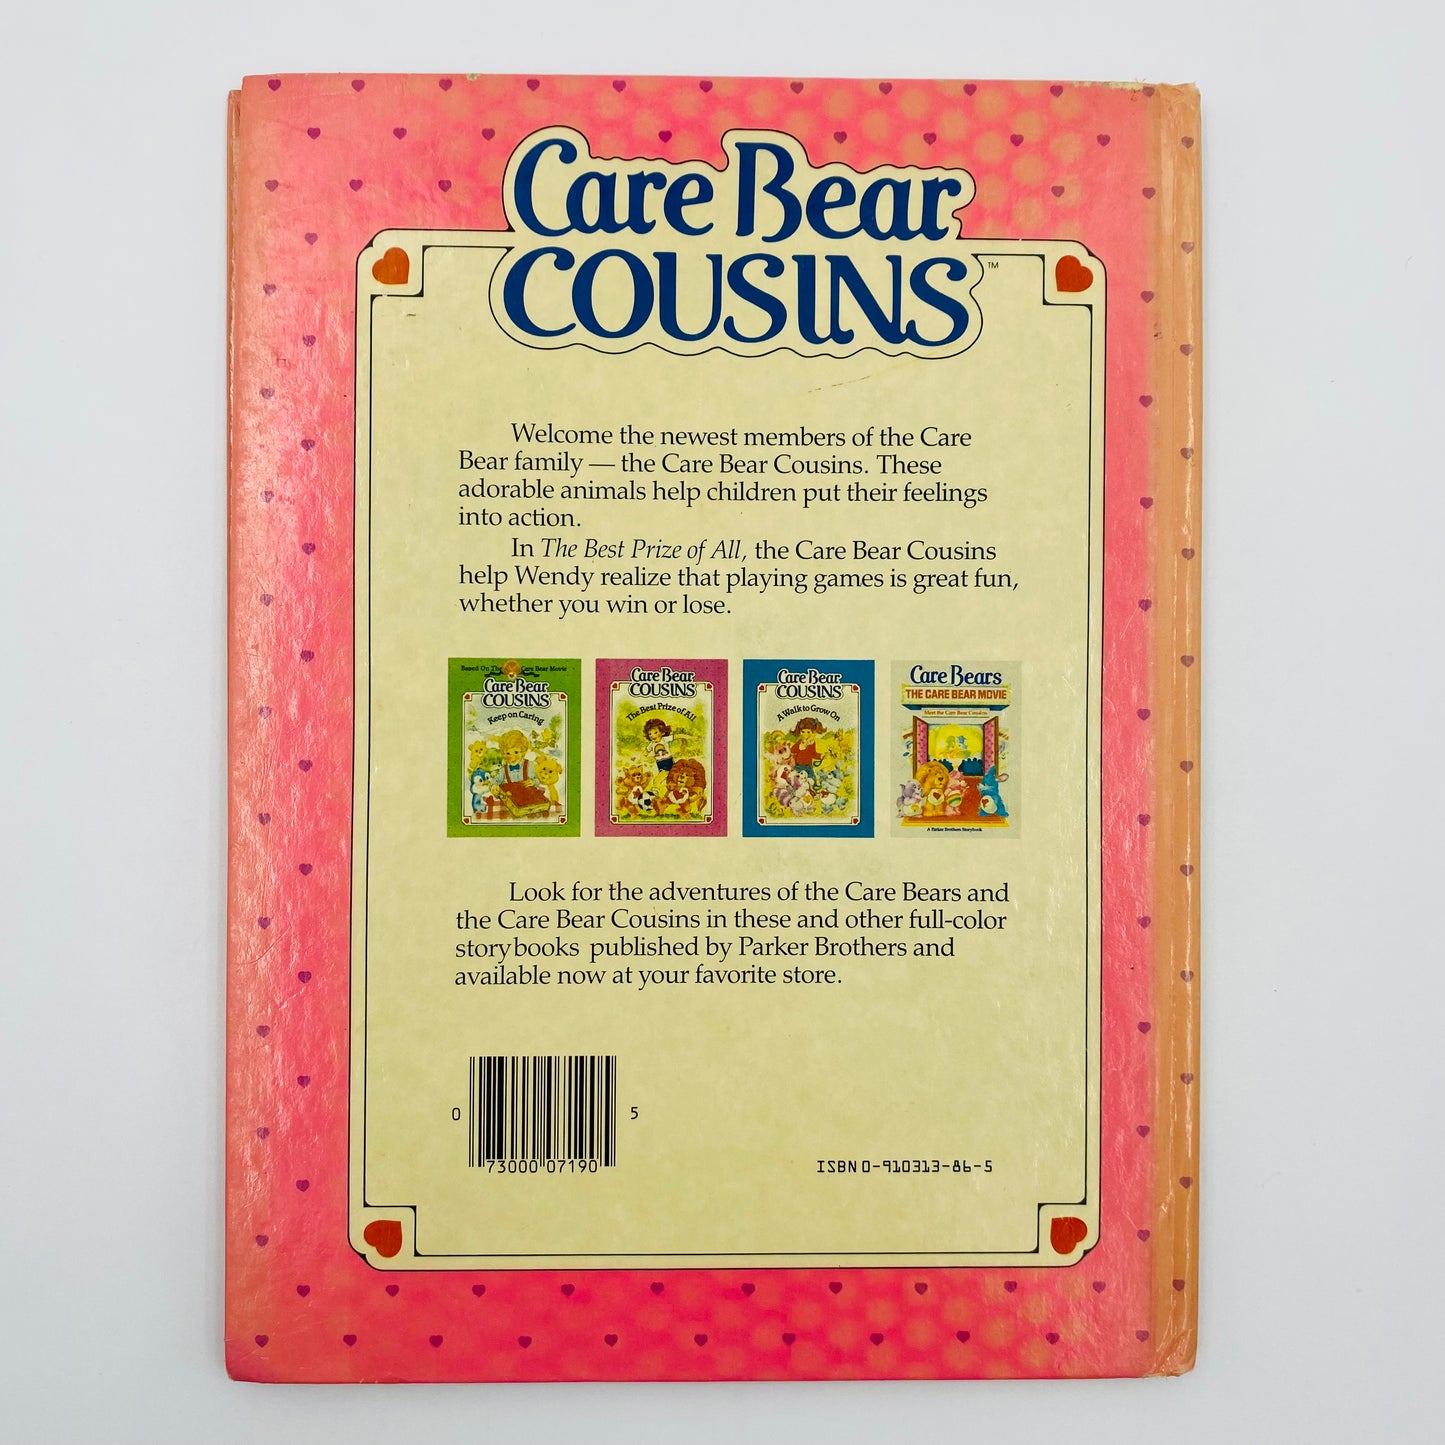 Care Bear Cousins: The Best Prize of All book (1985) A Parker Brothers Story Book